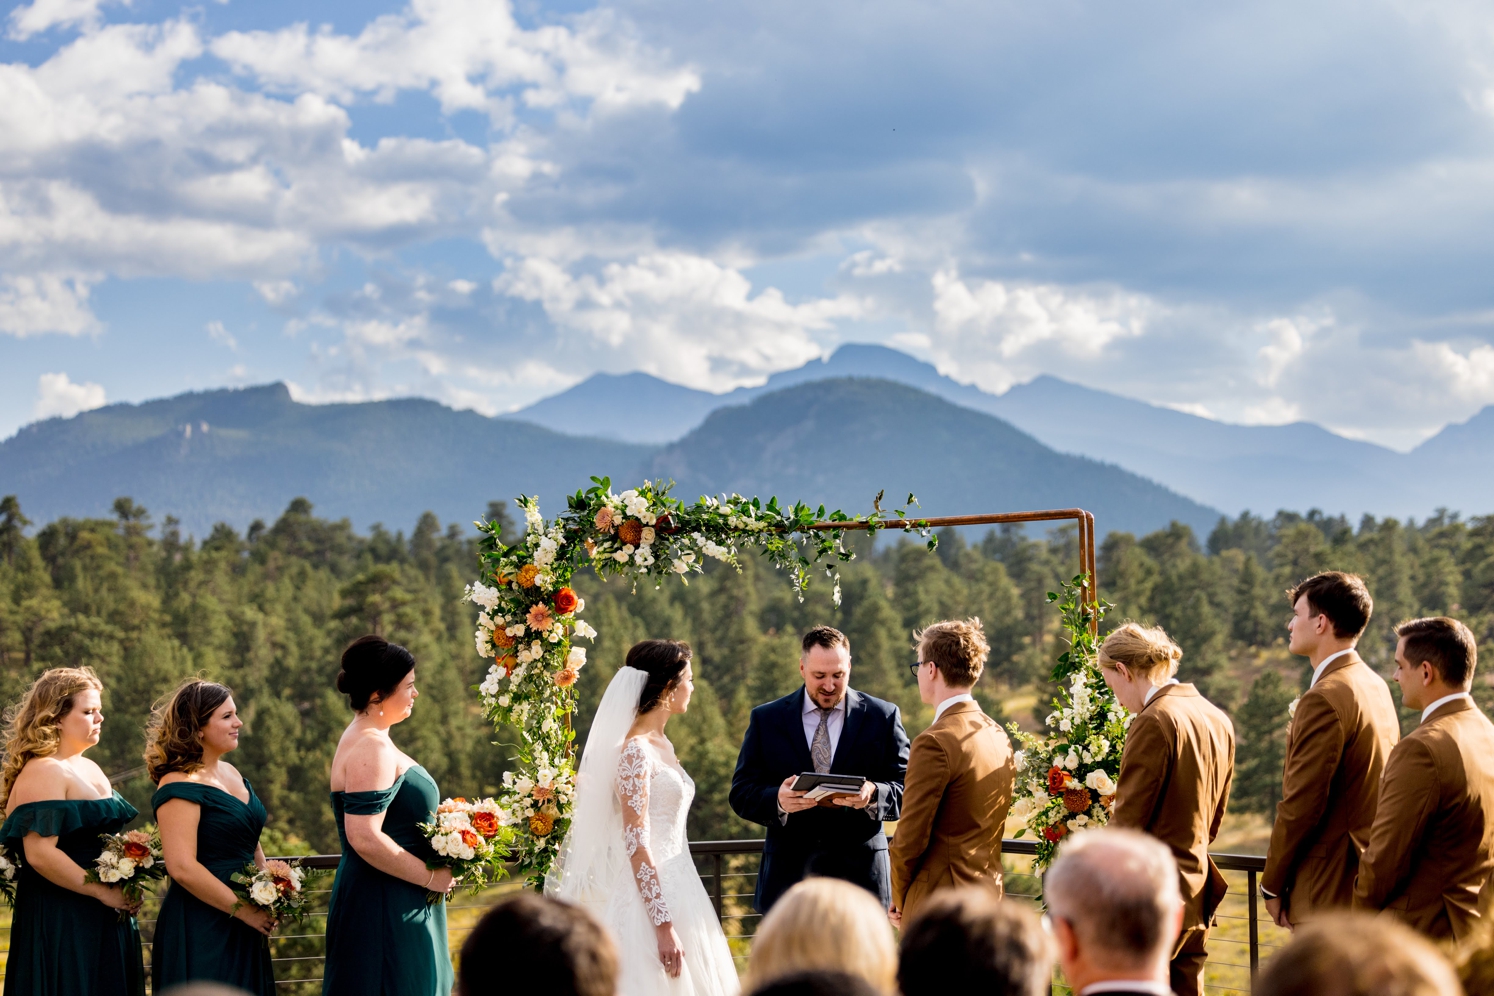 Full service wedding planner: couple getting married outside with mountains in the backdrop in Colorado | McArthur Weddings and Events